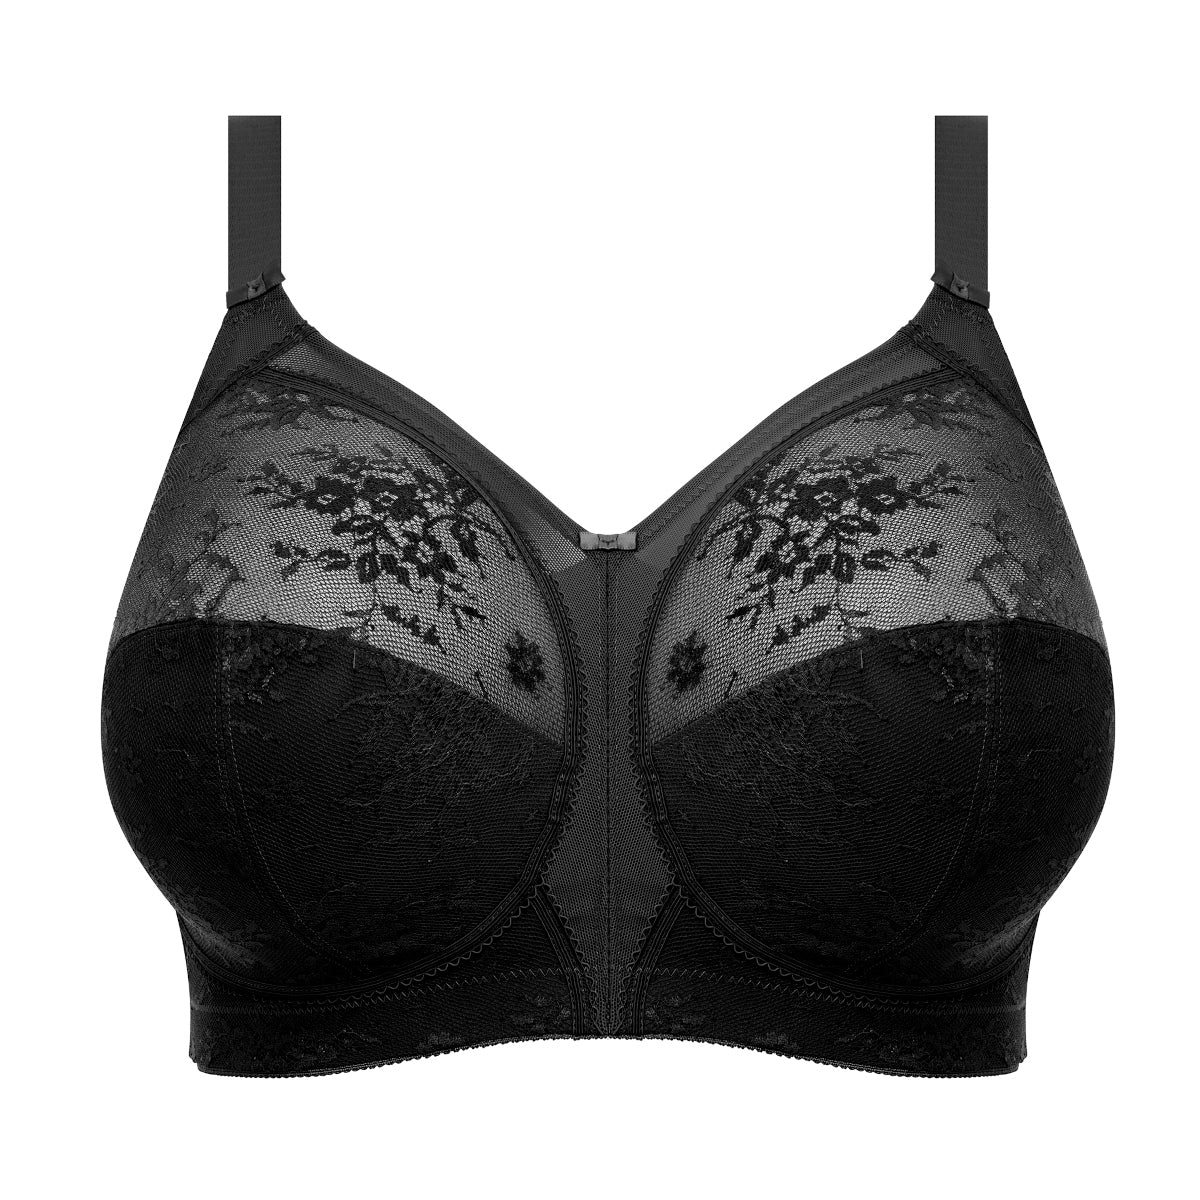 Buy DD-GG Black Recycled Lace Comfort Full Cup Bra 38G, Bras